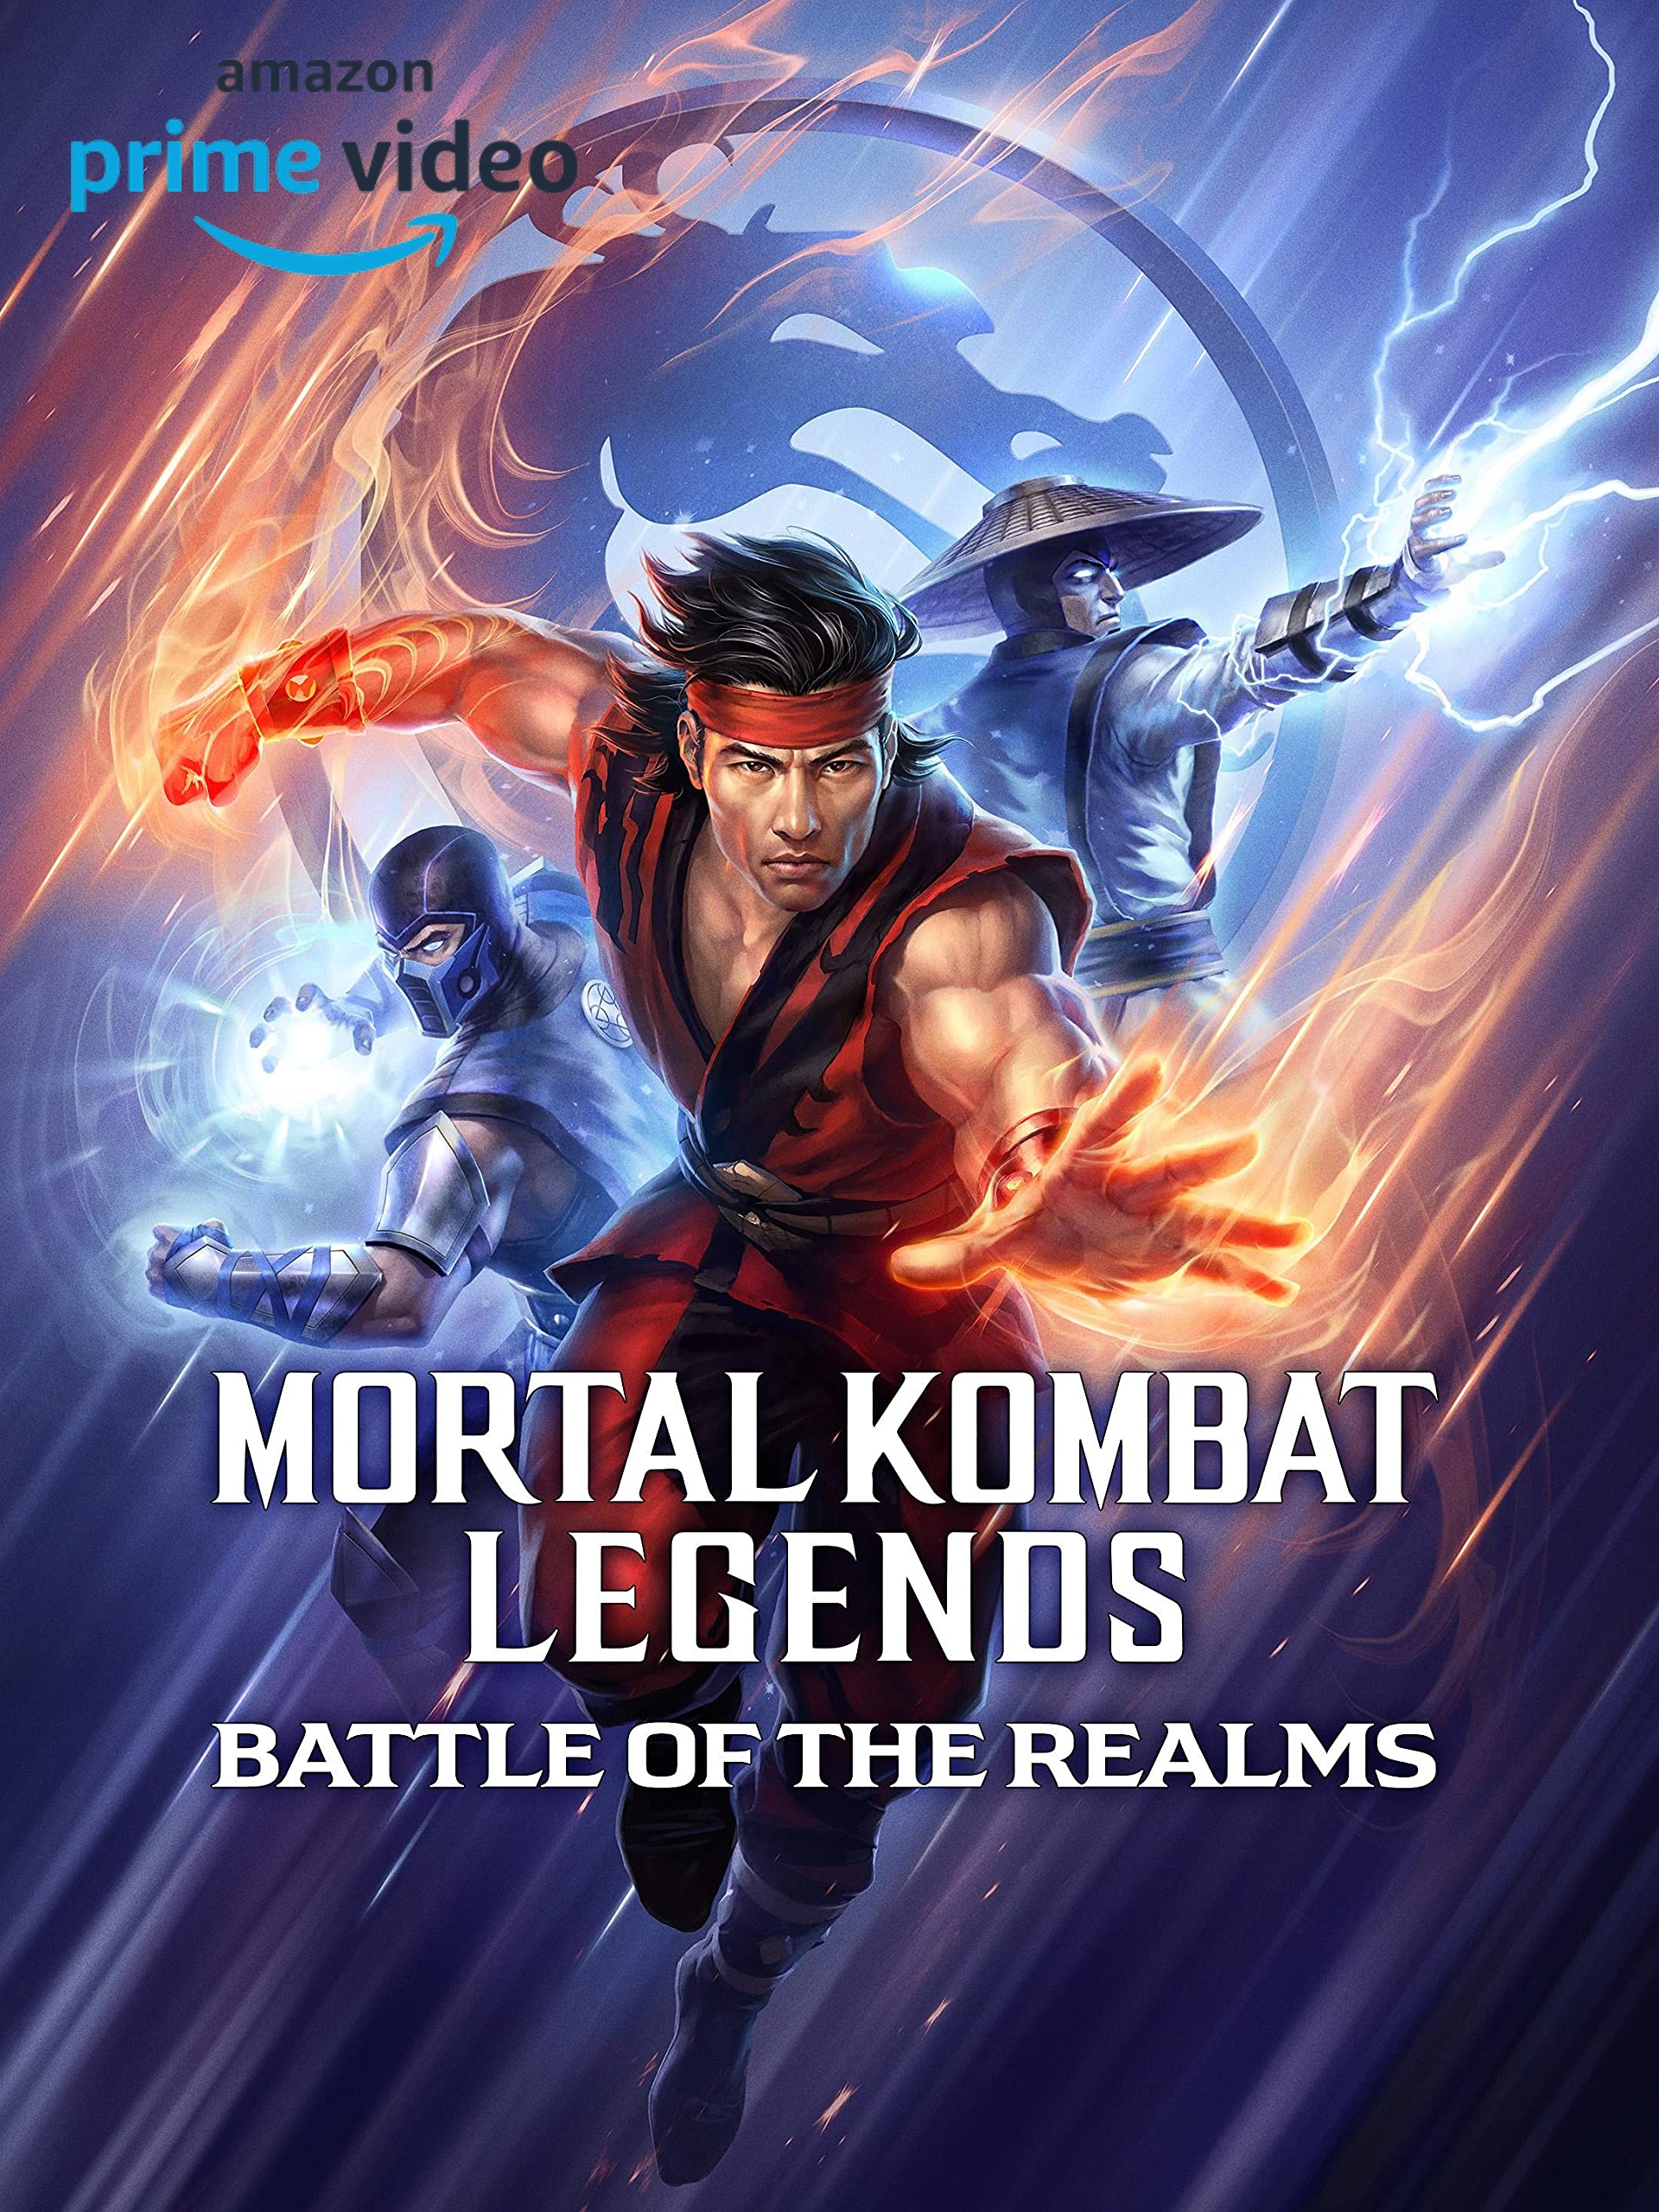 Is Mortal Kombat Legends Battle of The Realms on Amazon prime